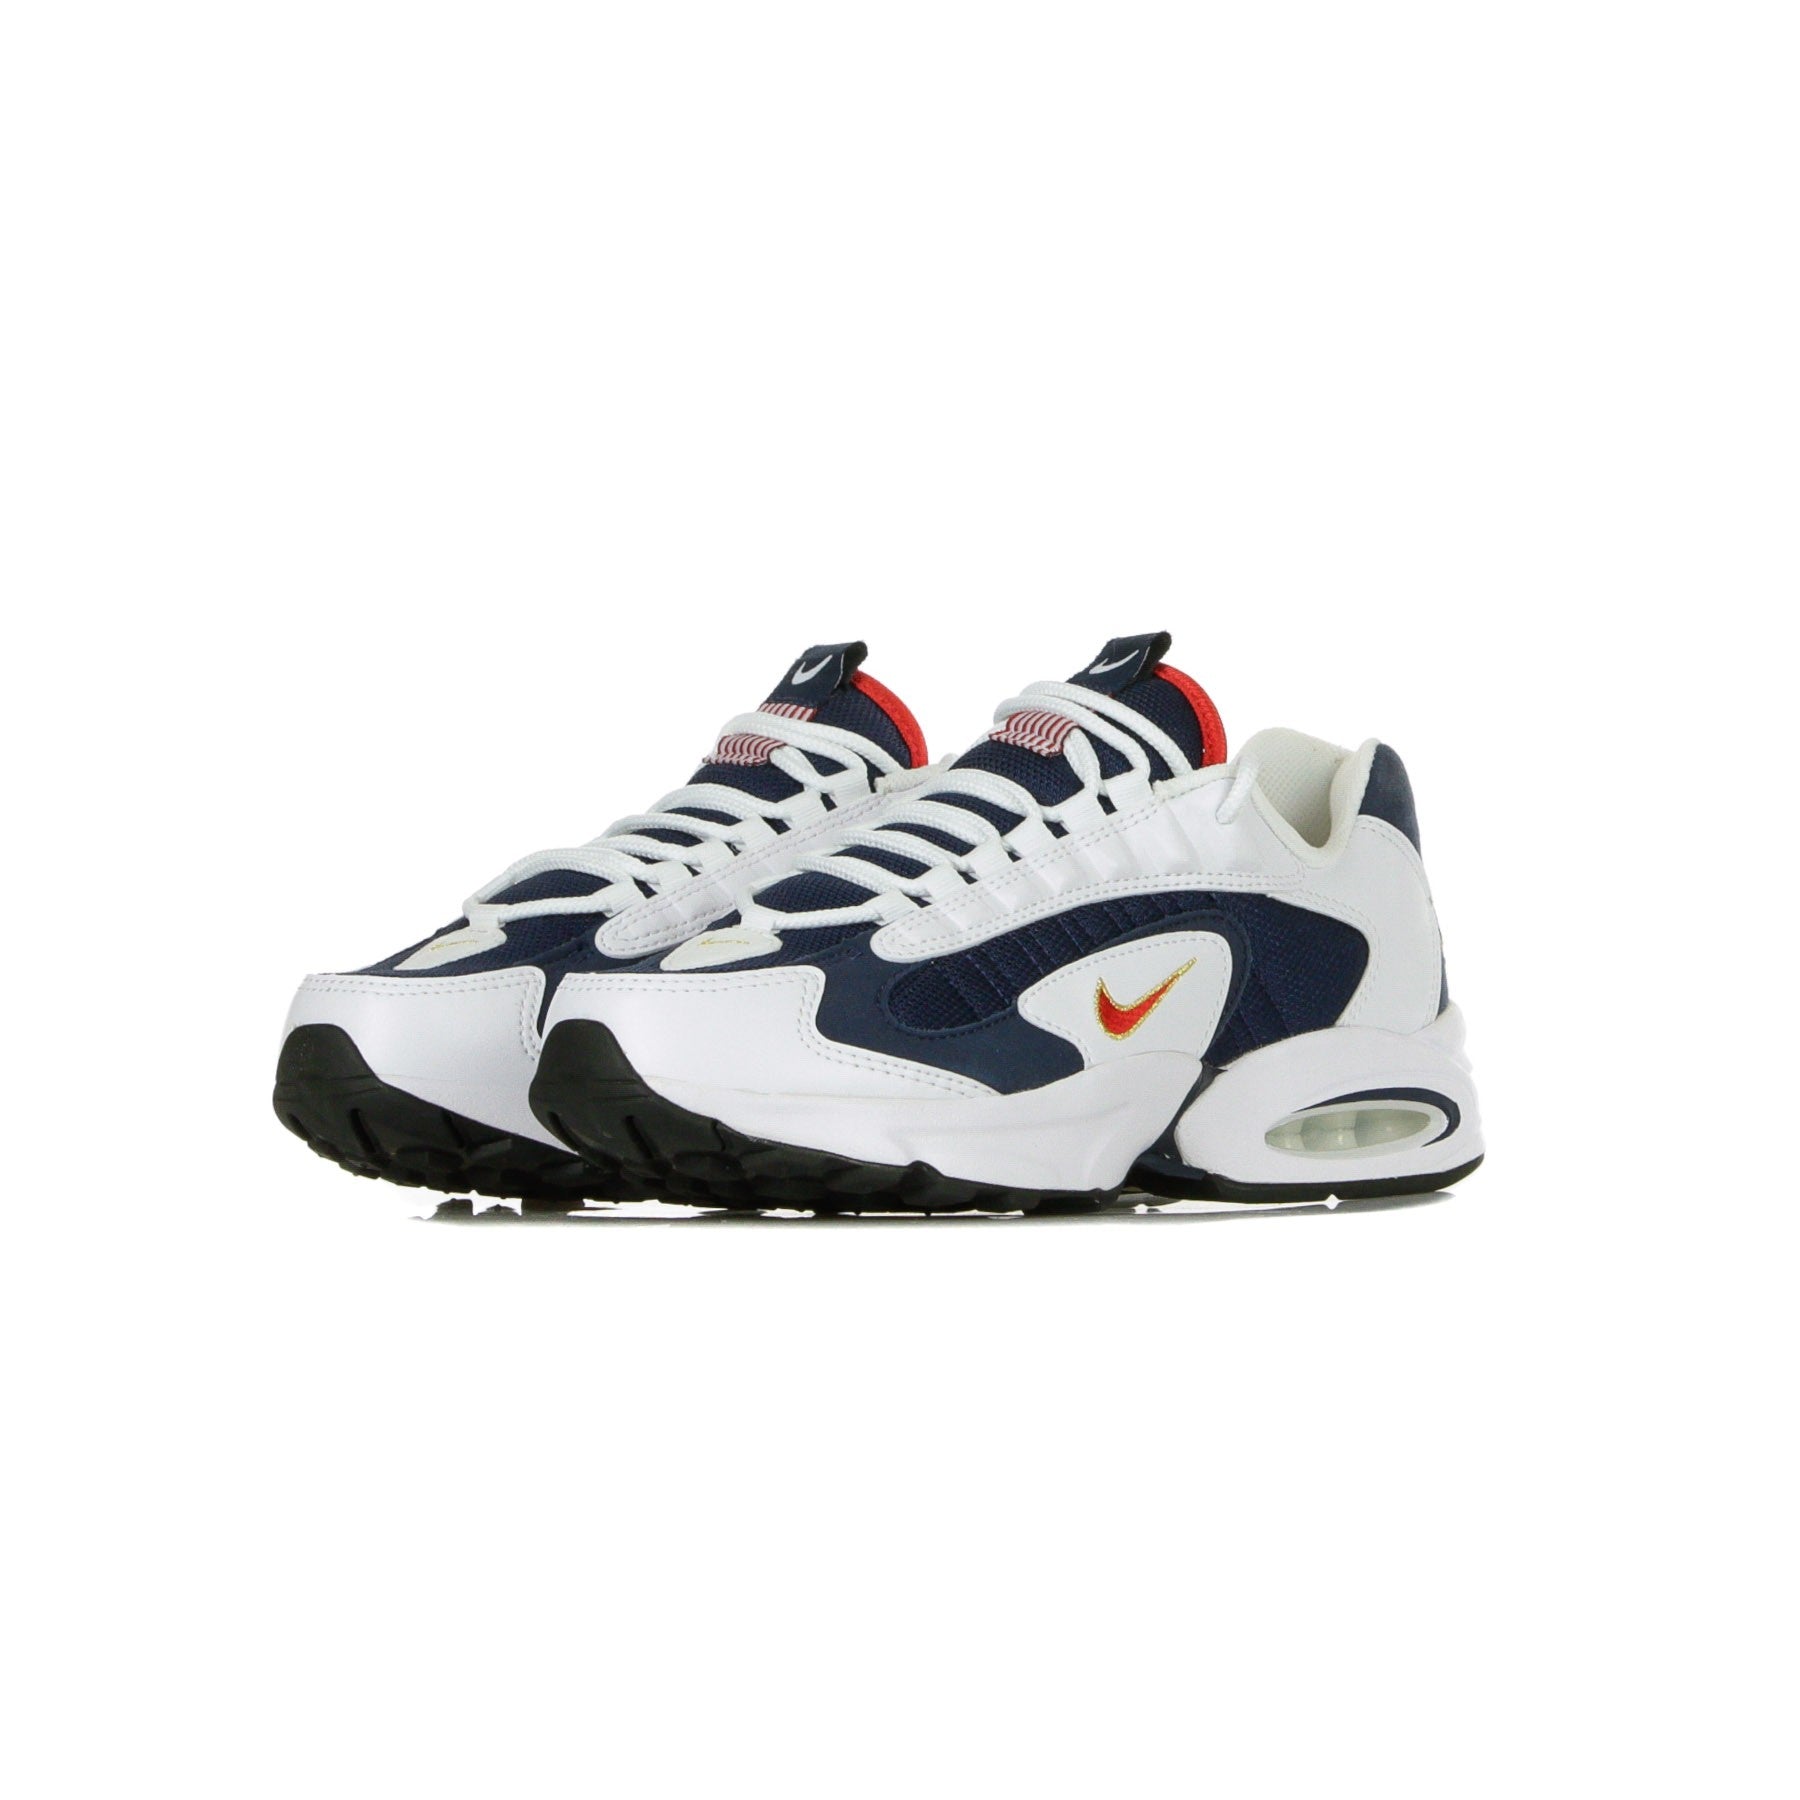 Air Max Triax Usa Low Men's Shoe Midnight Navy/university Red/white